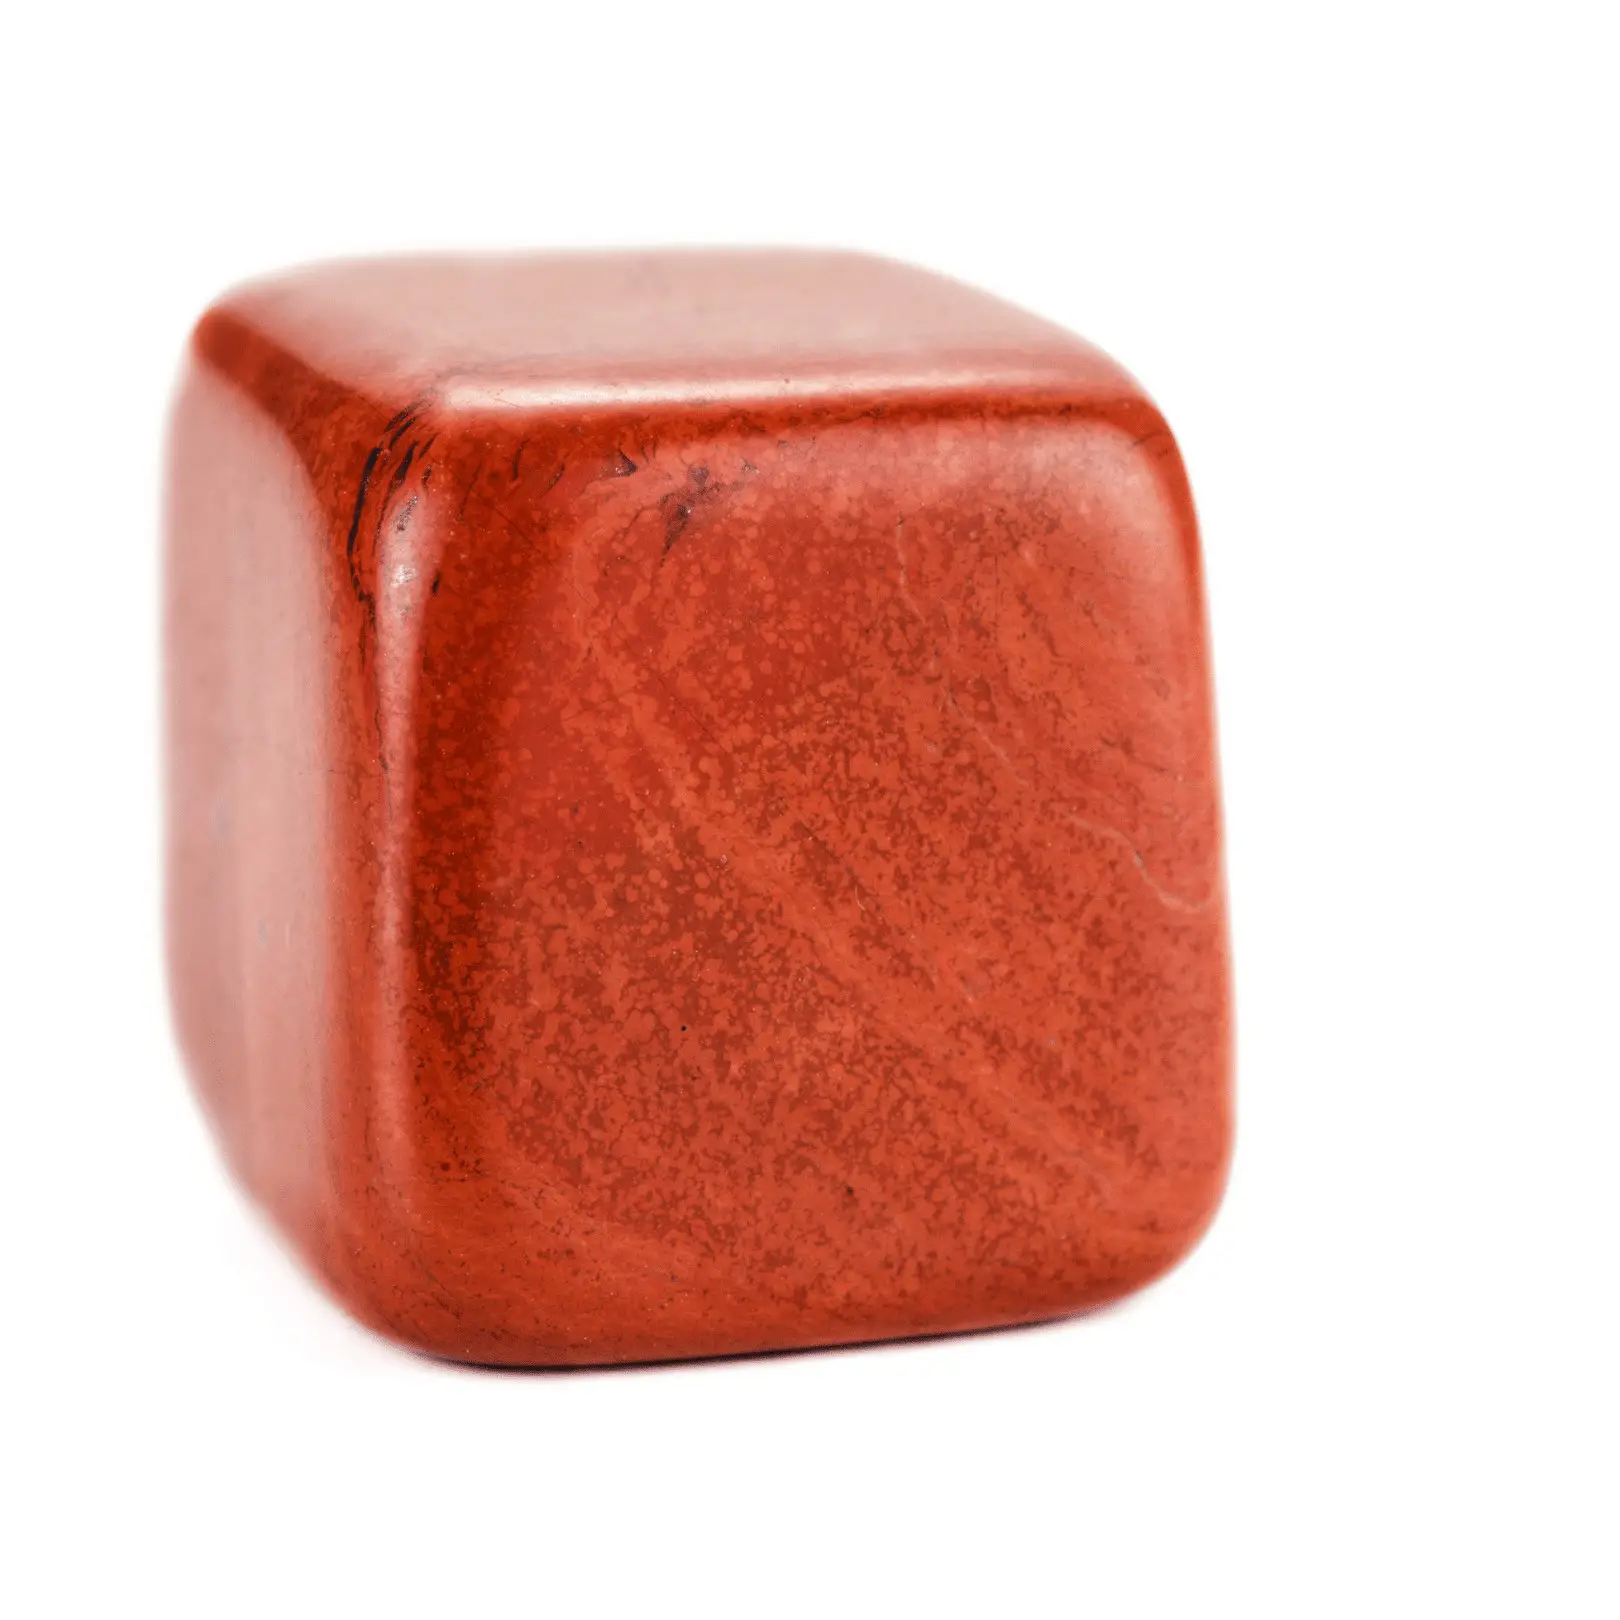 What does Red Jasper do